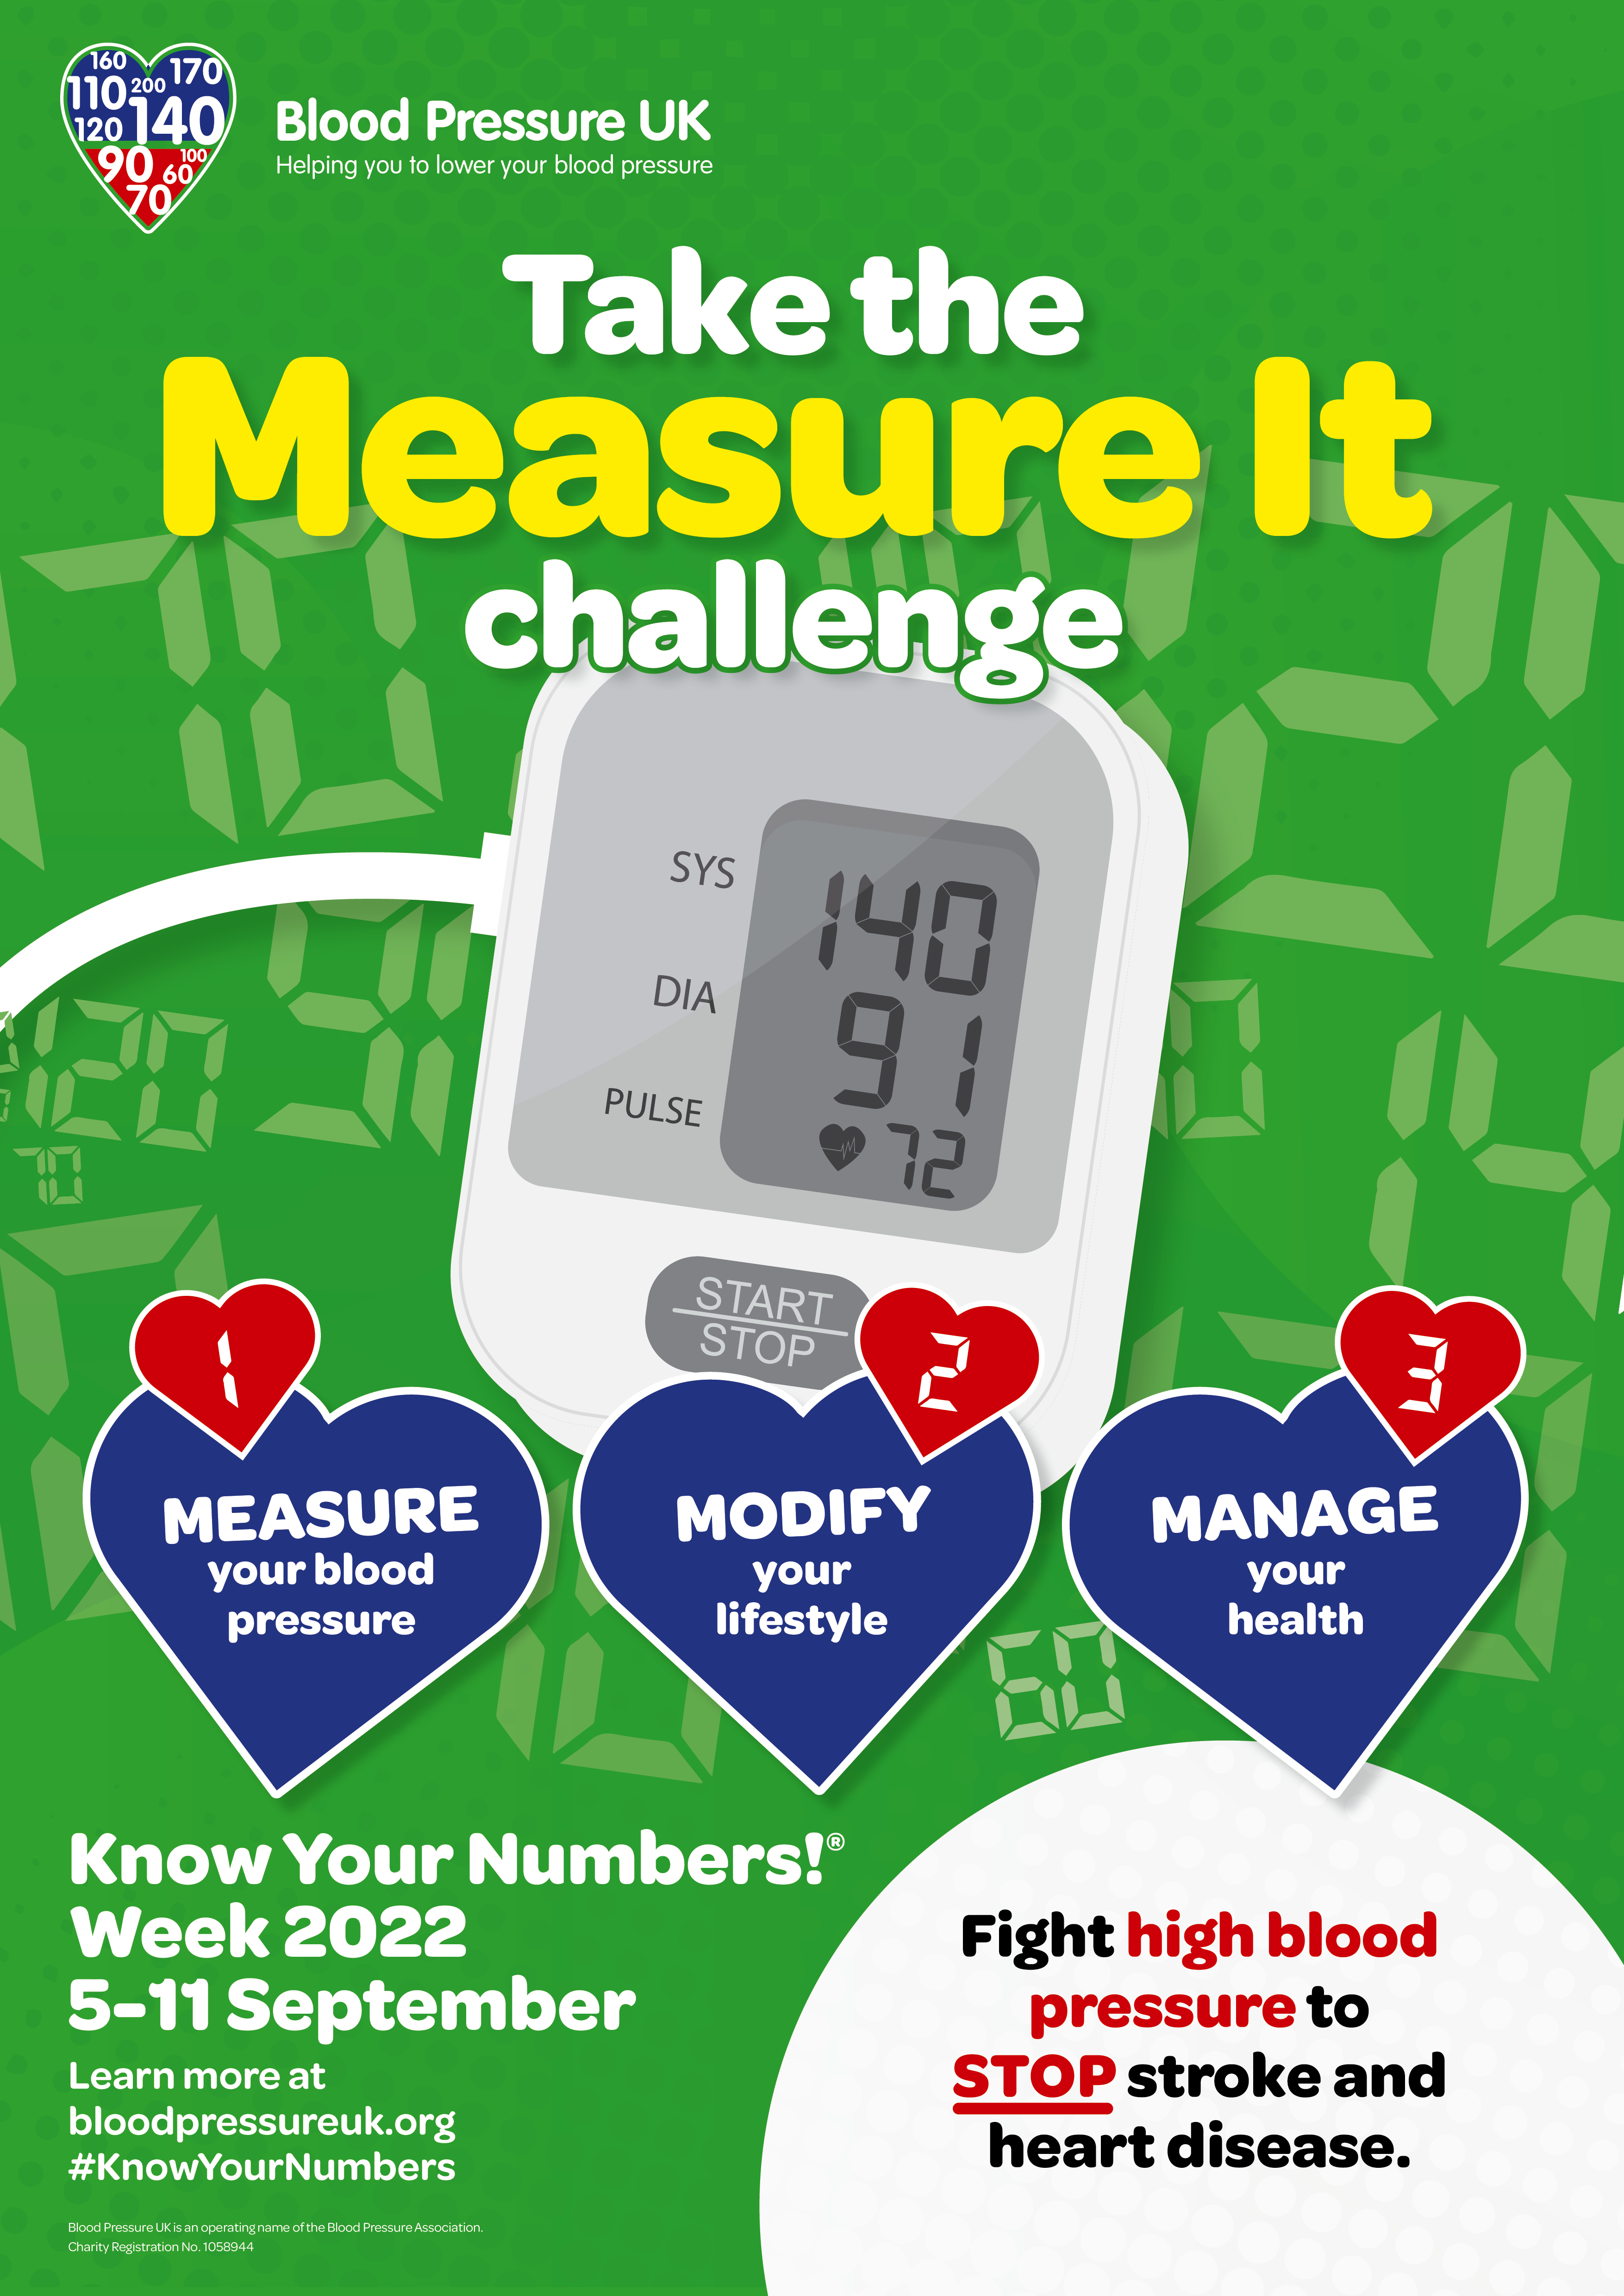 Manage Your Blood Pressure with the App for Hypertension